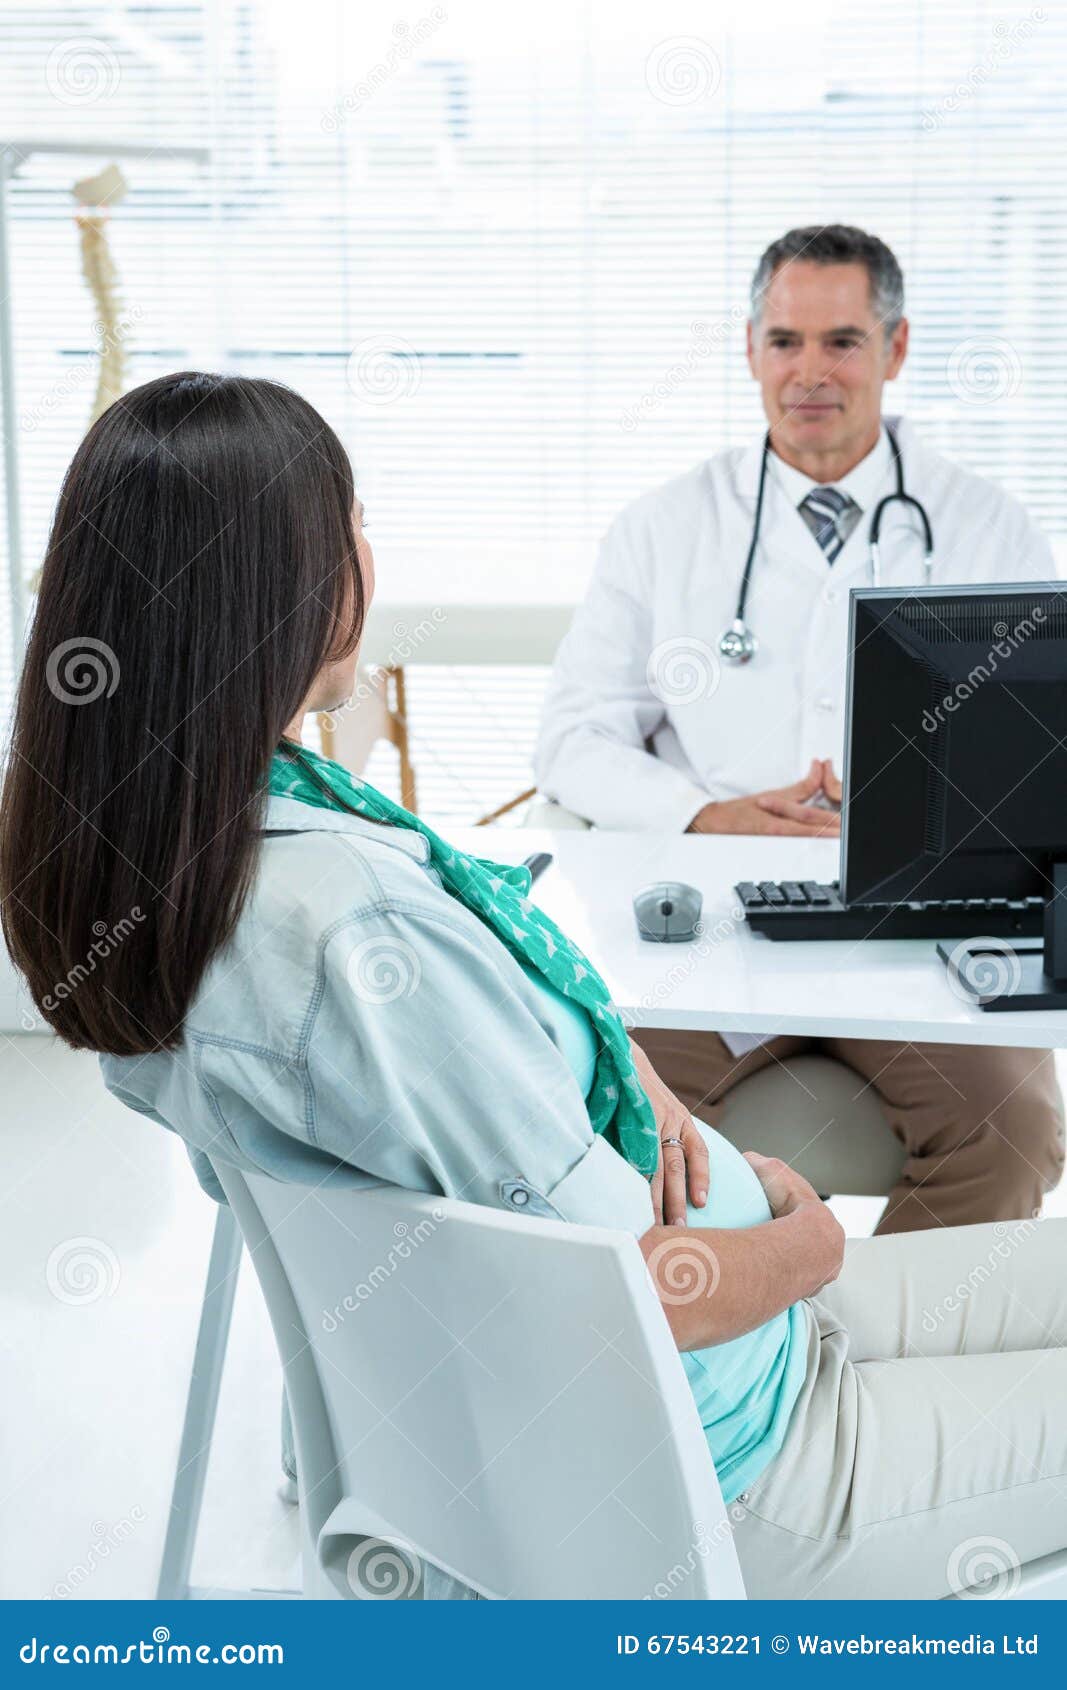 Doctor Interacting With A Pregnant Woman At Clinic Stock Image Image